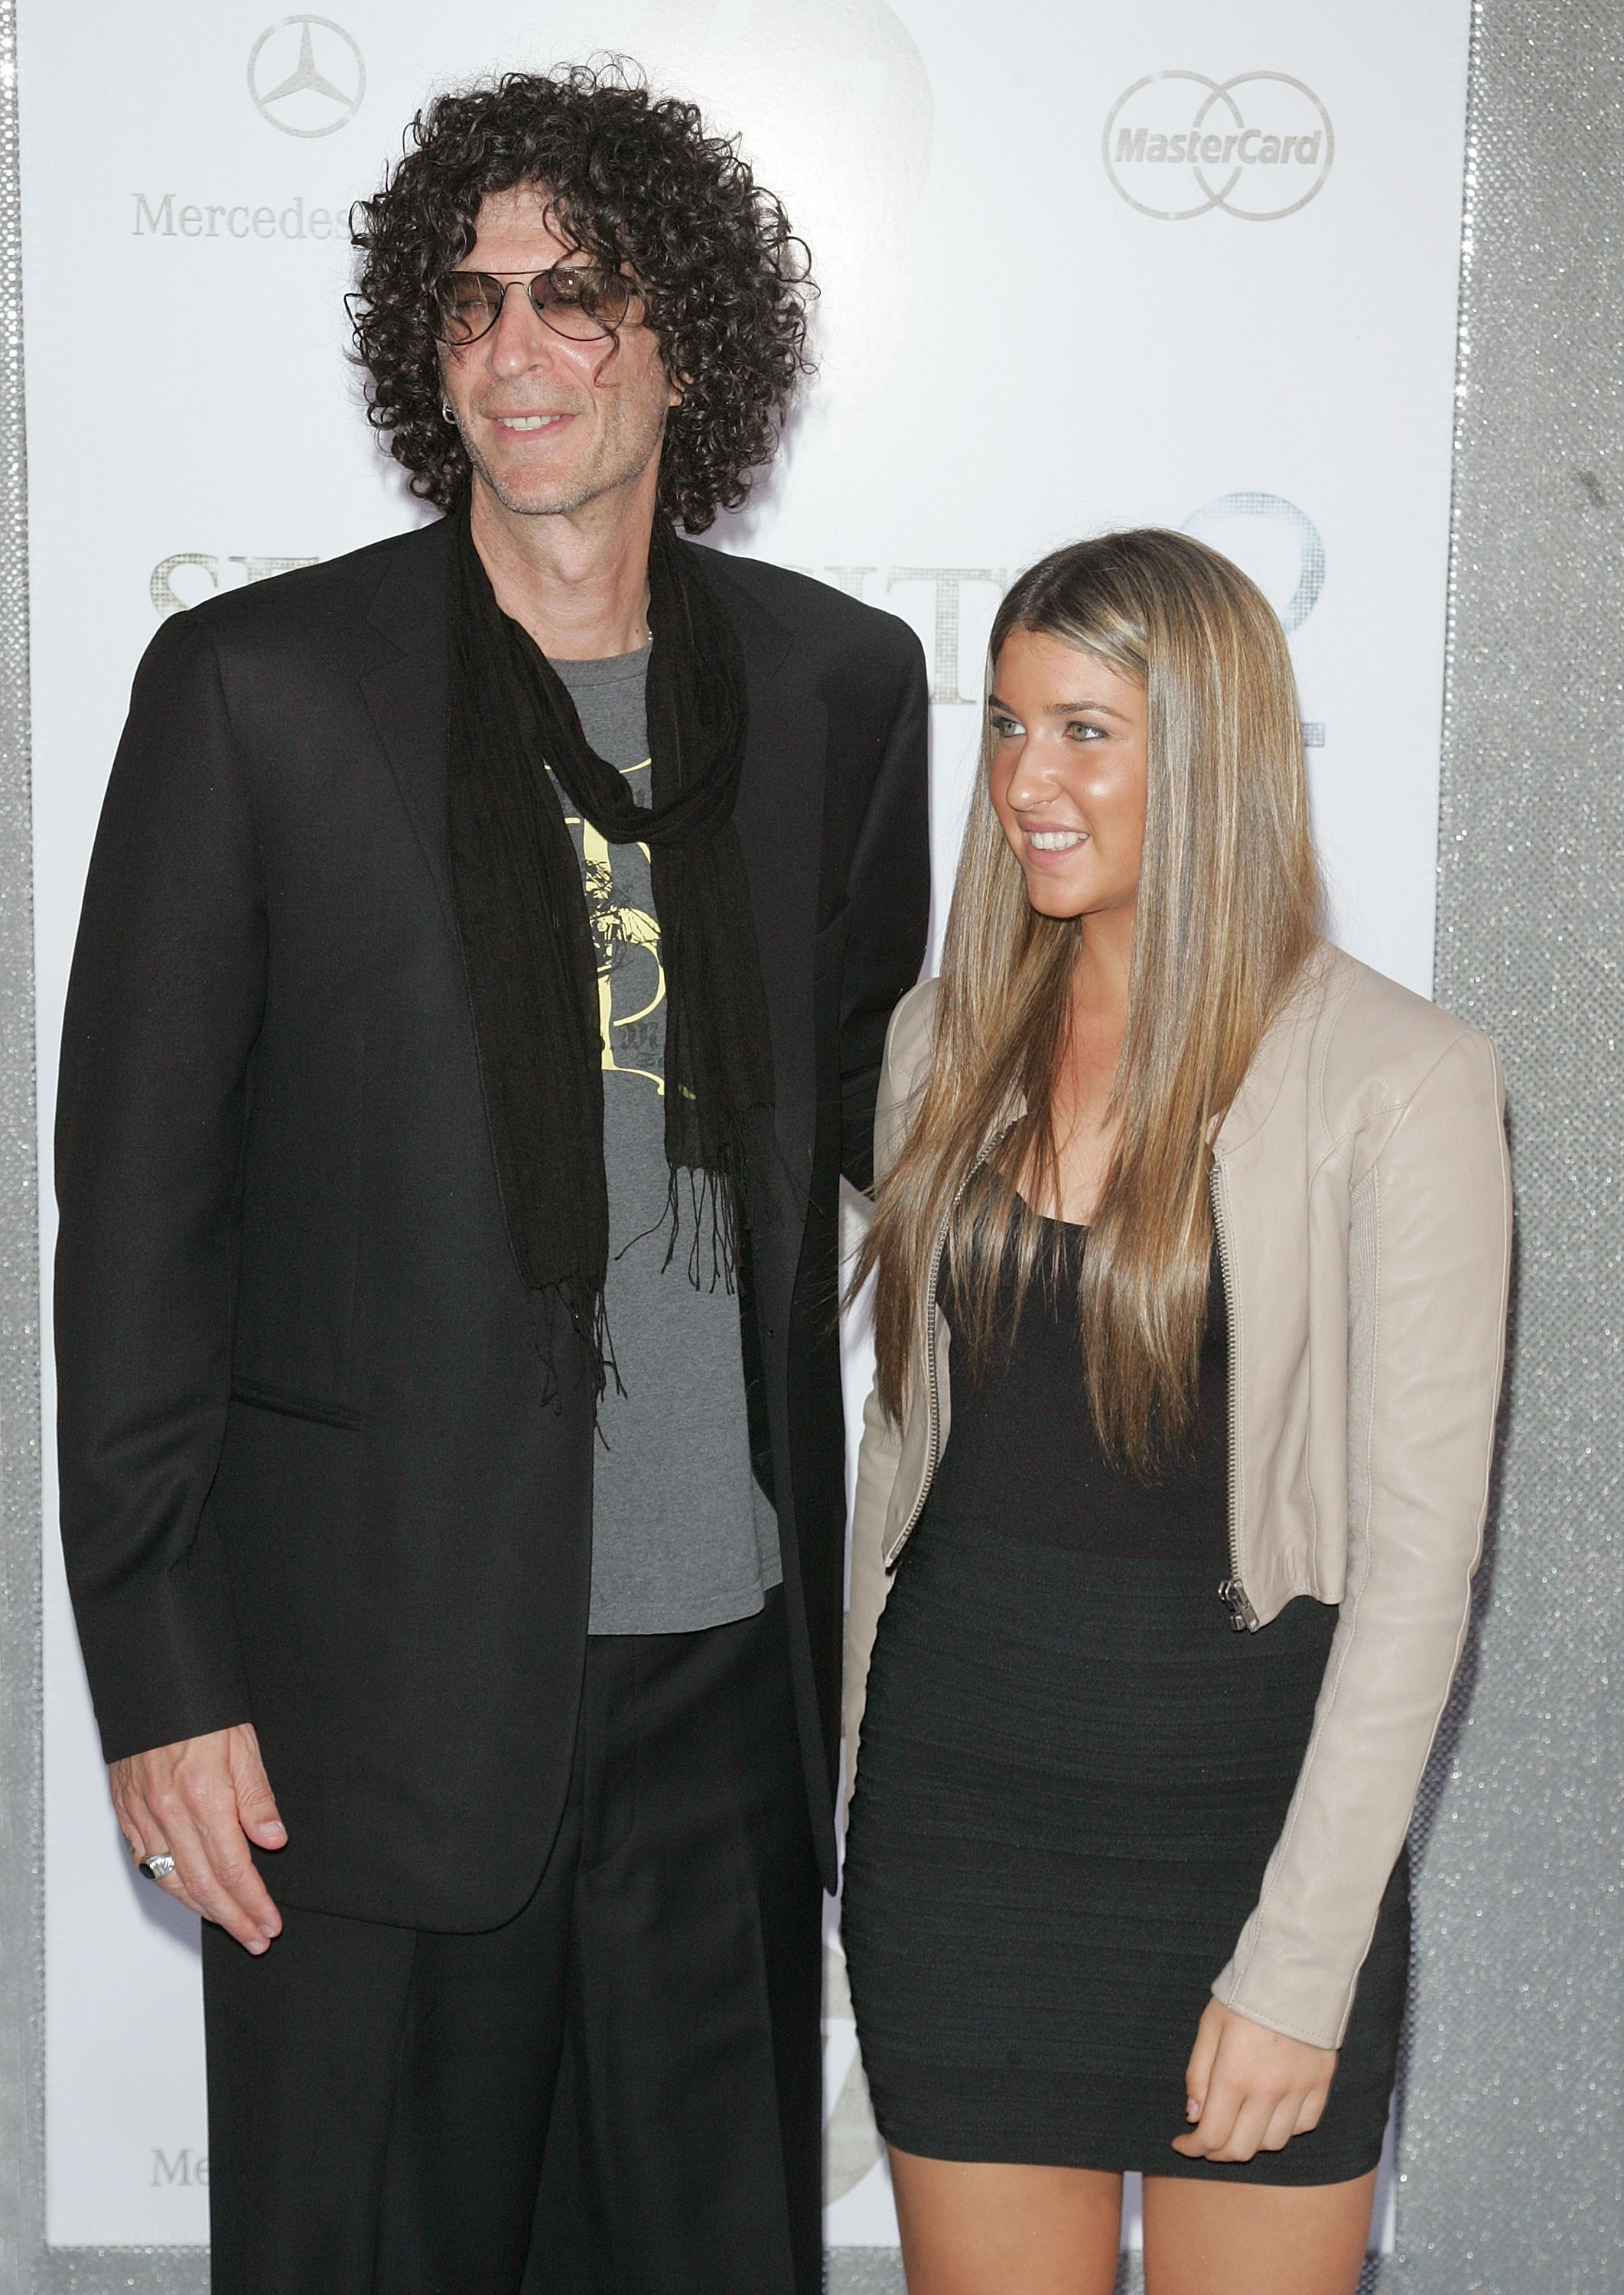 Howard Stern and his daughter at the premiere of "Sex and the City 2" on May 24, 2010, in New York City | Source: Getty Images